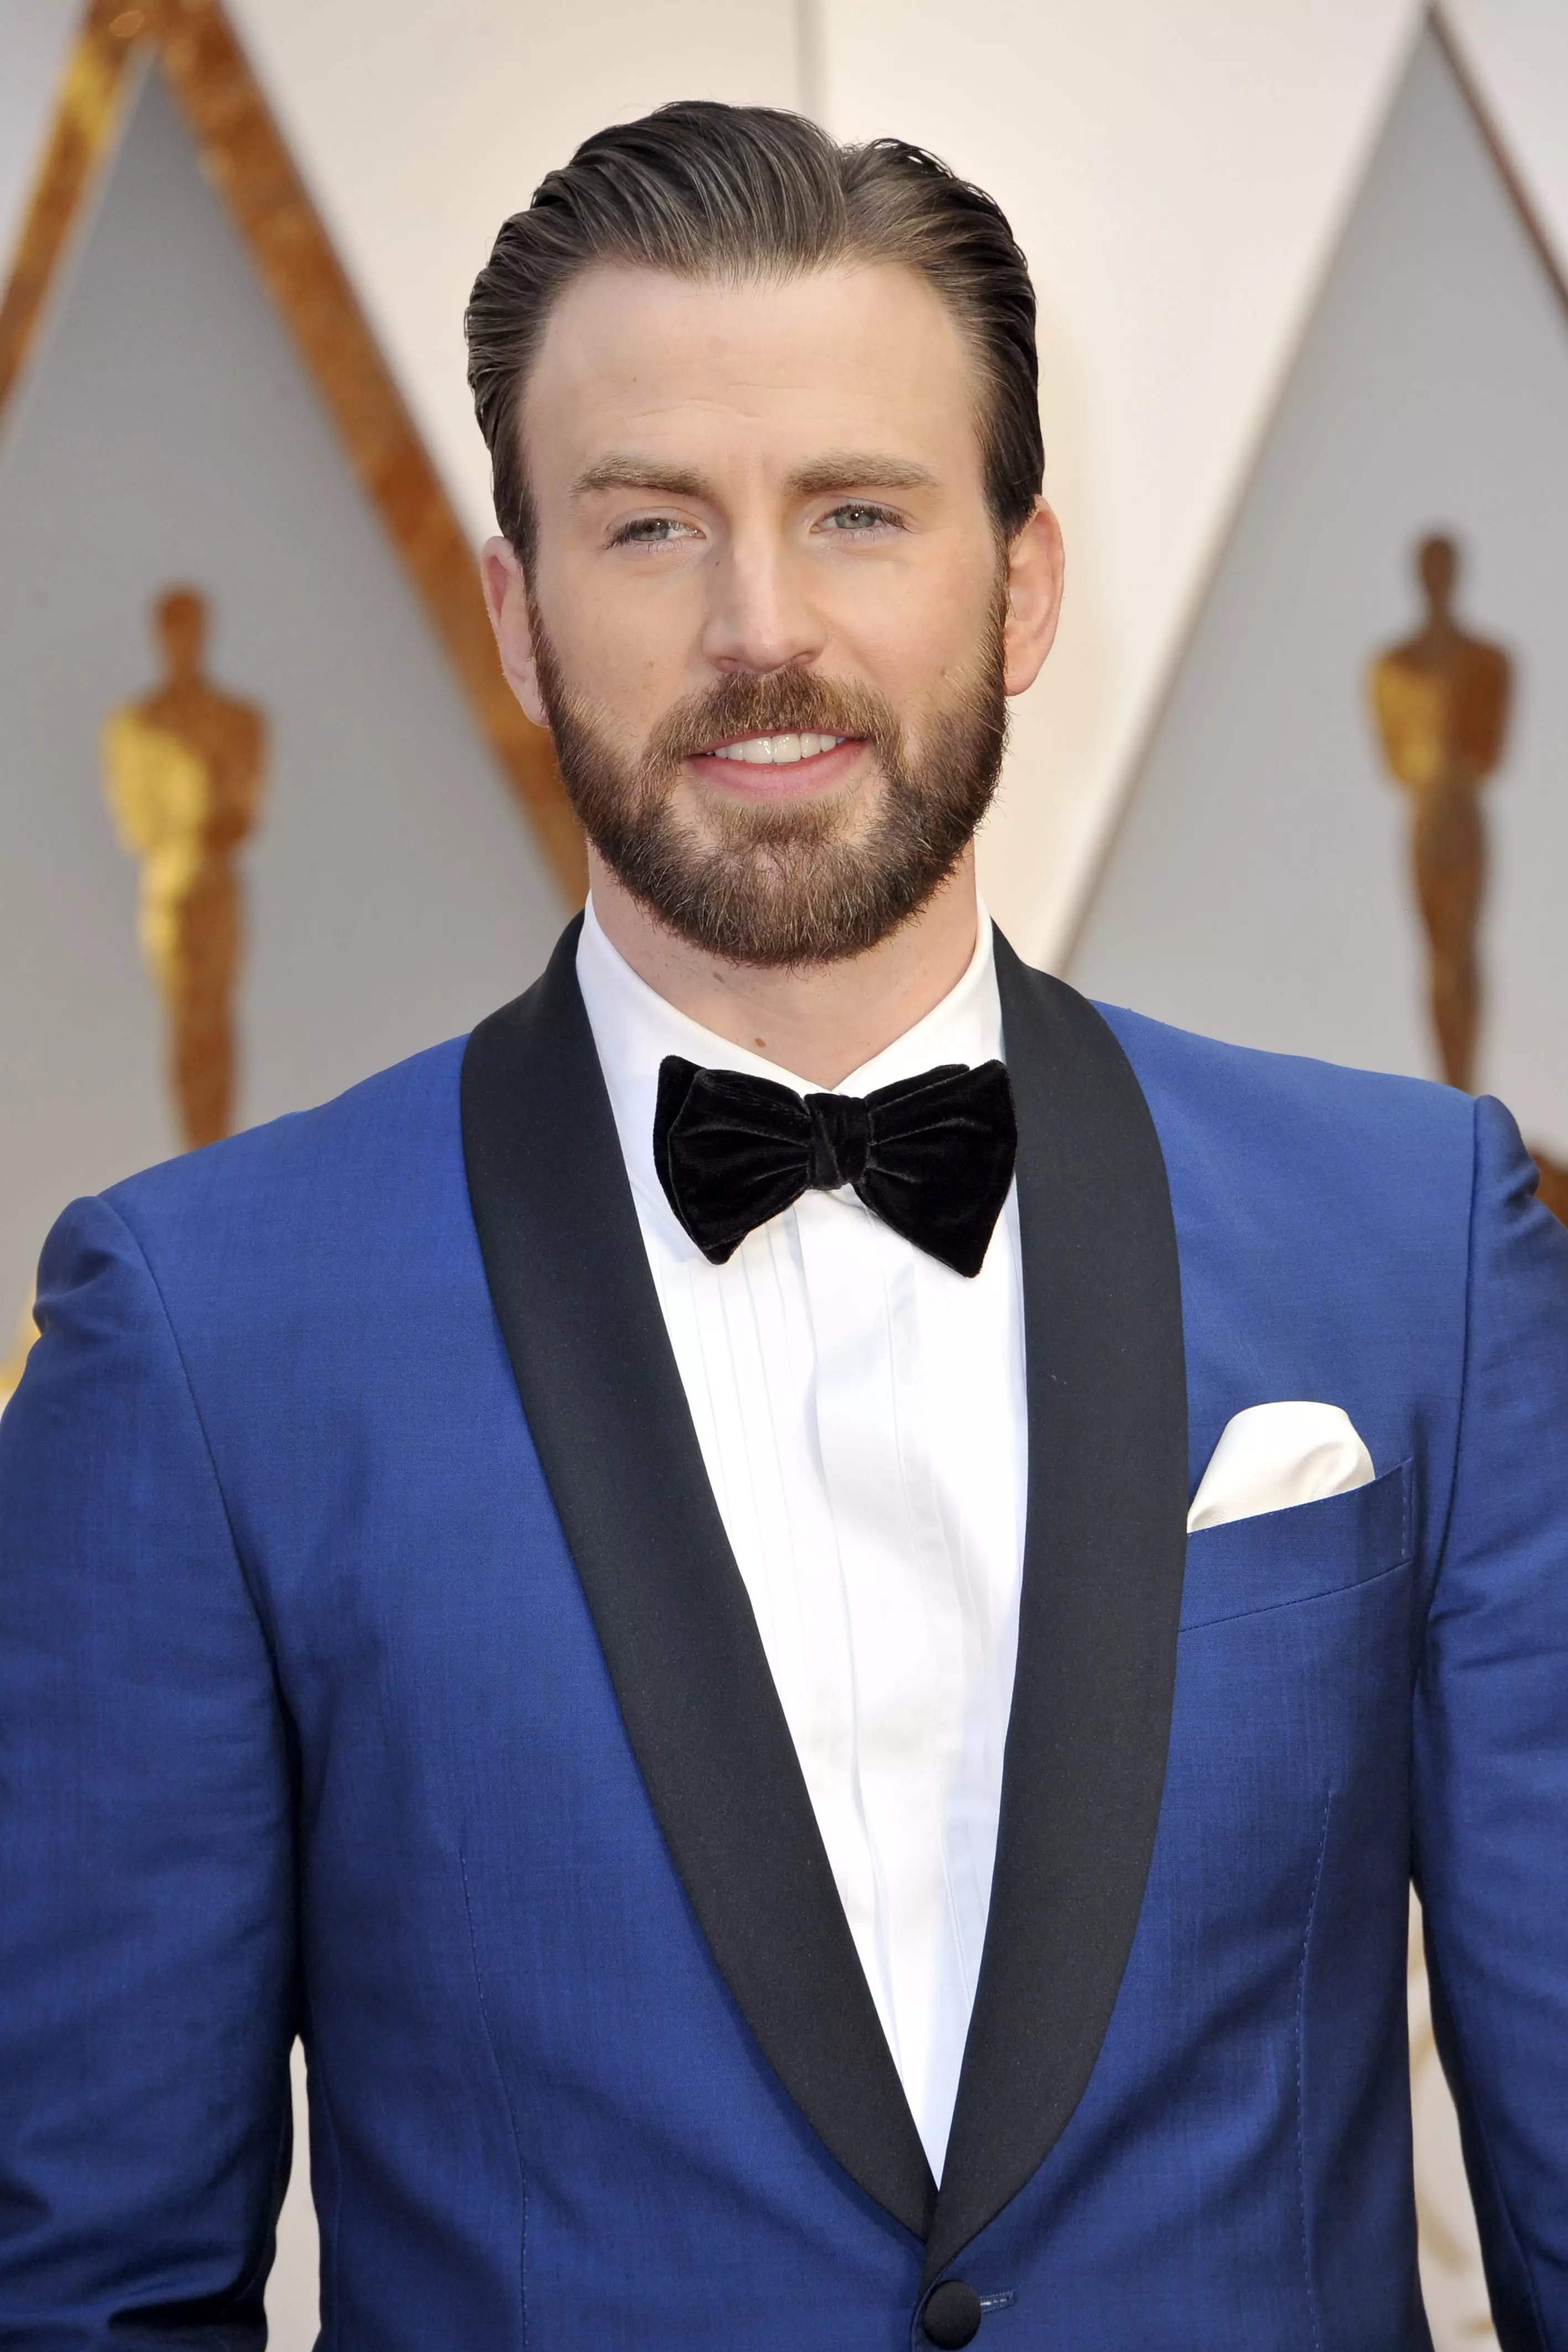 Chris Evans' social media has been a hot topic recently (